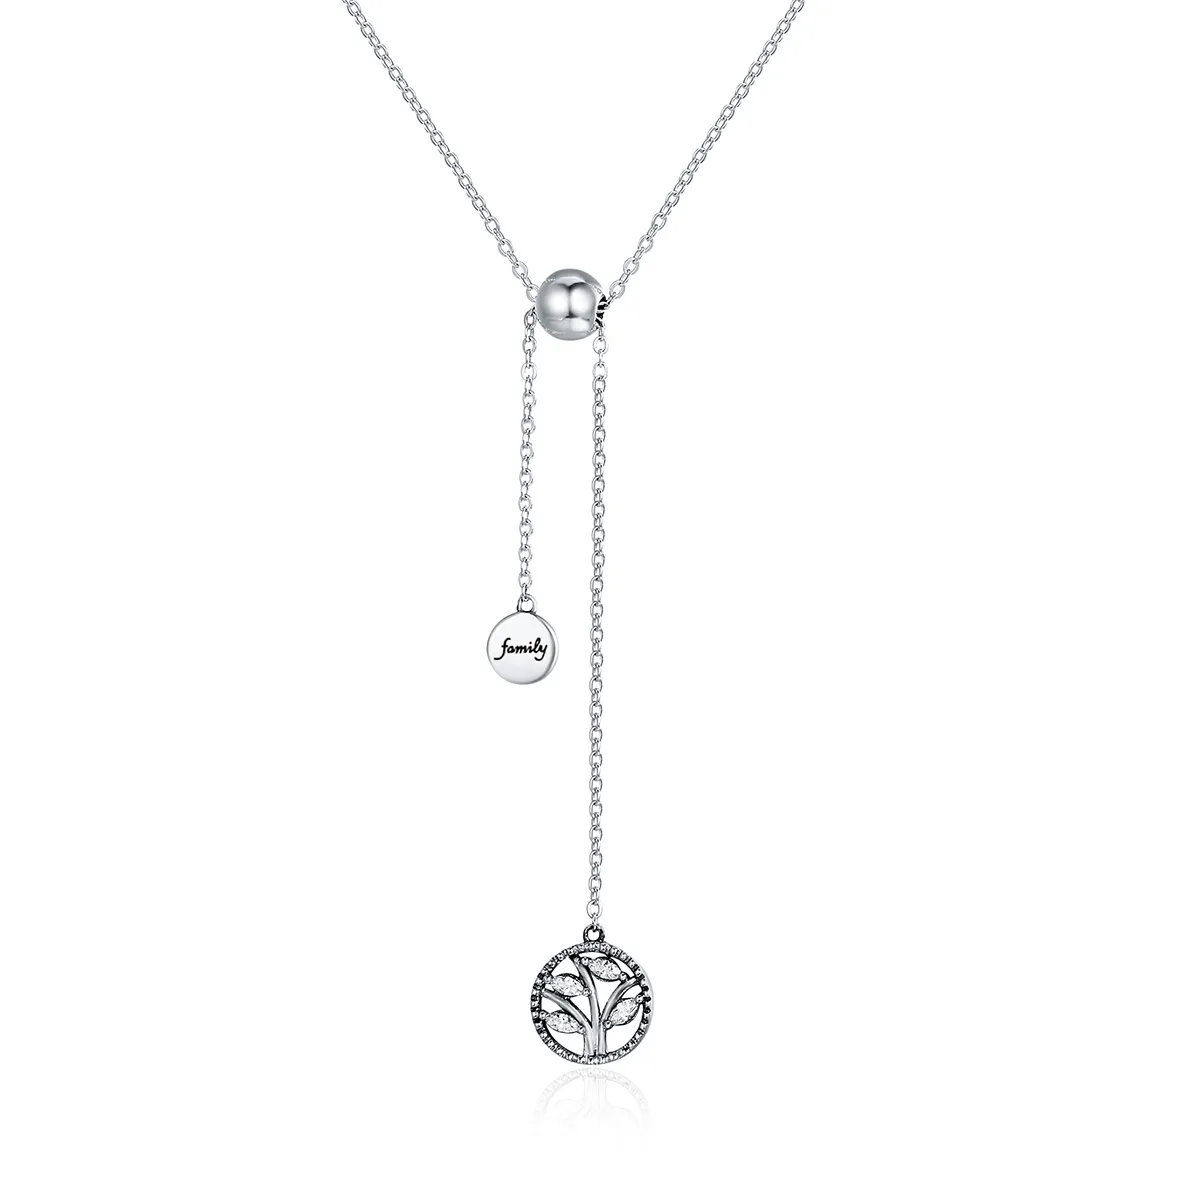 Pandora Style Silver Family Tree and Home Necklace - SCN106